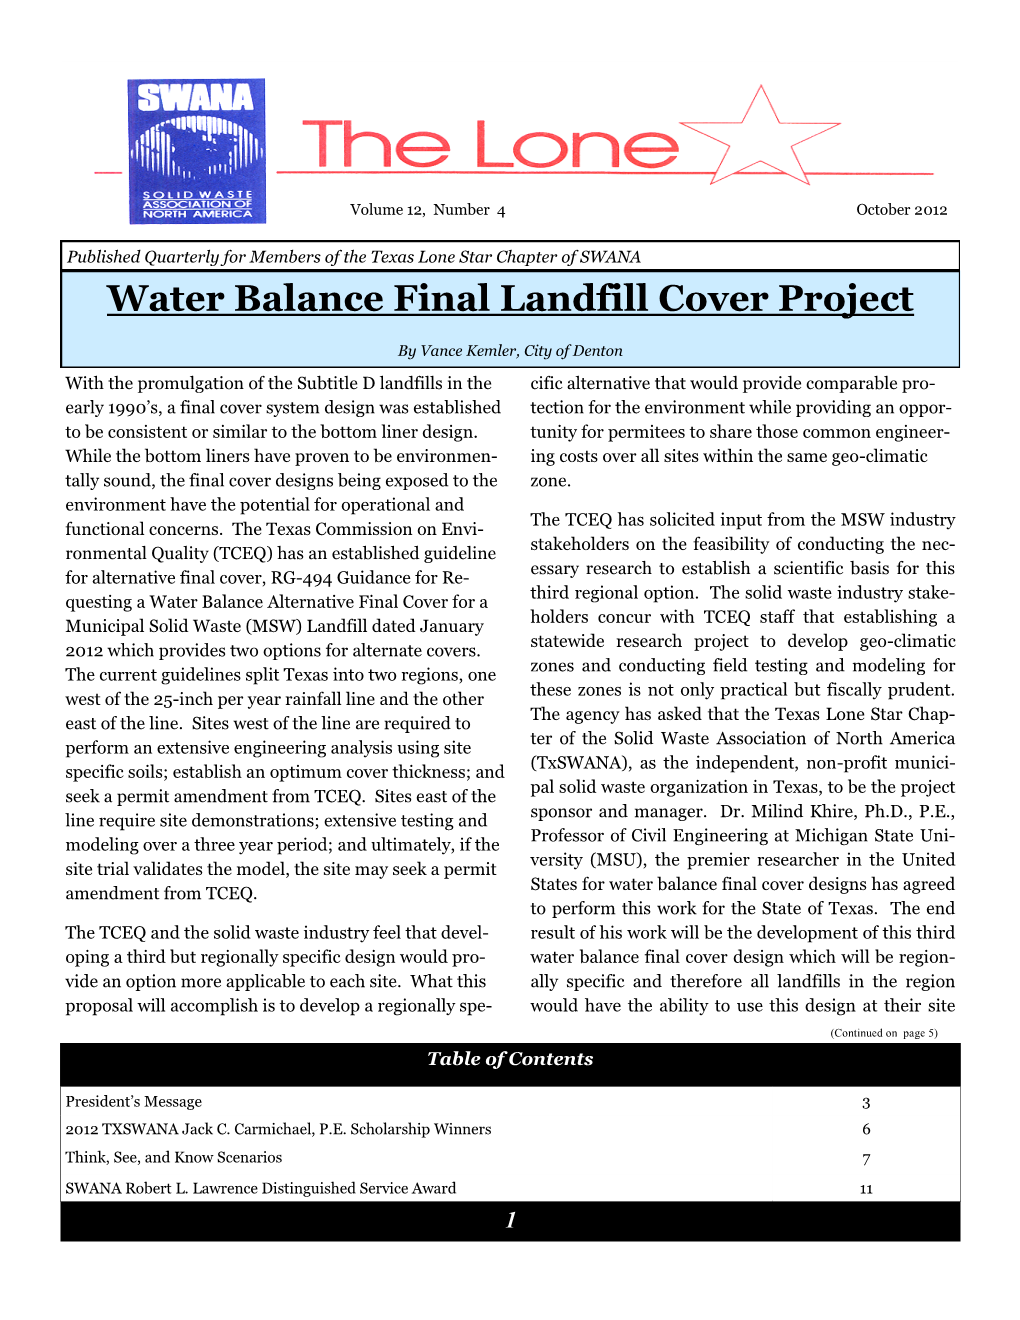 Water Balance Final Landfill Cover Project